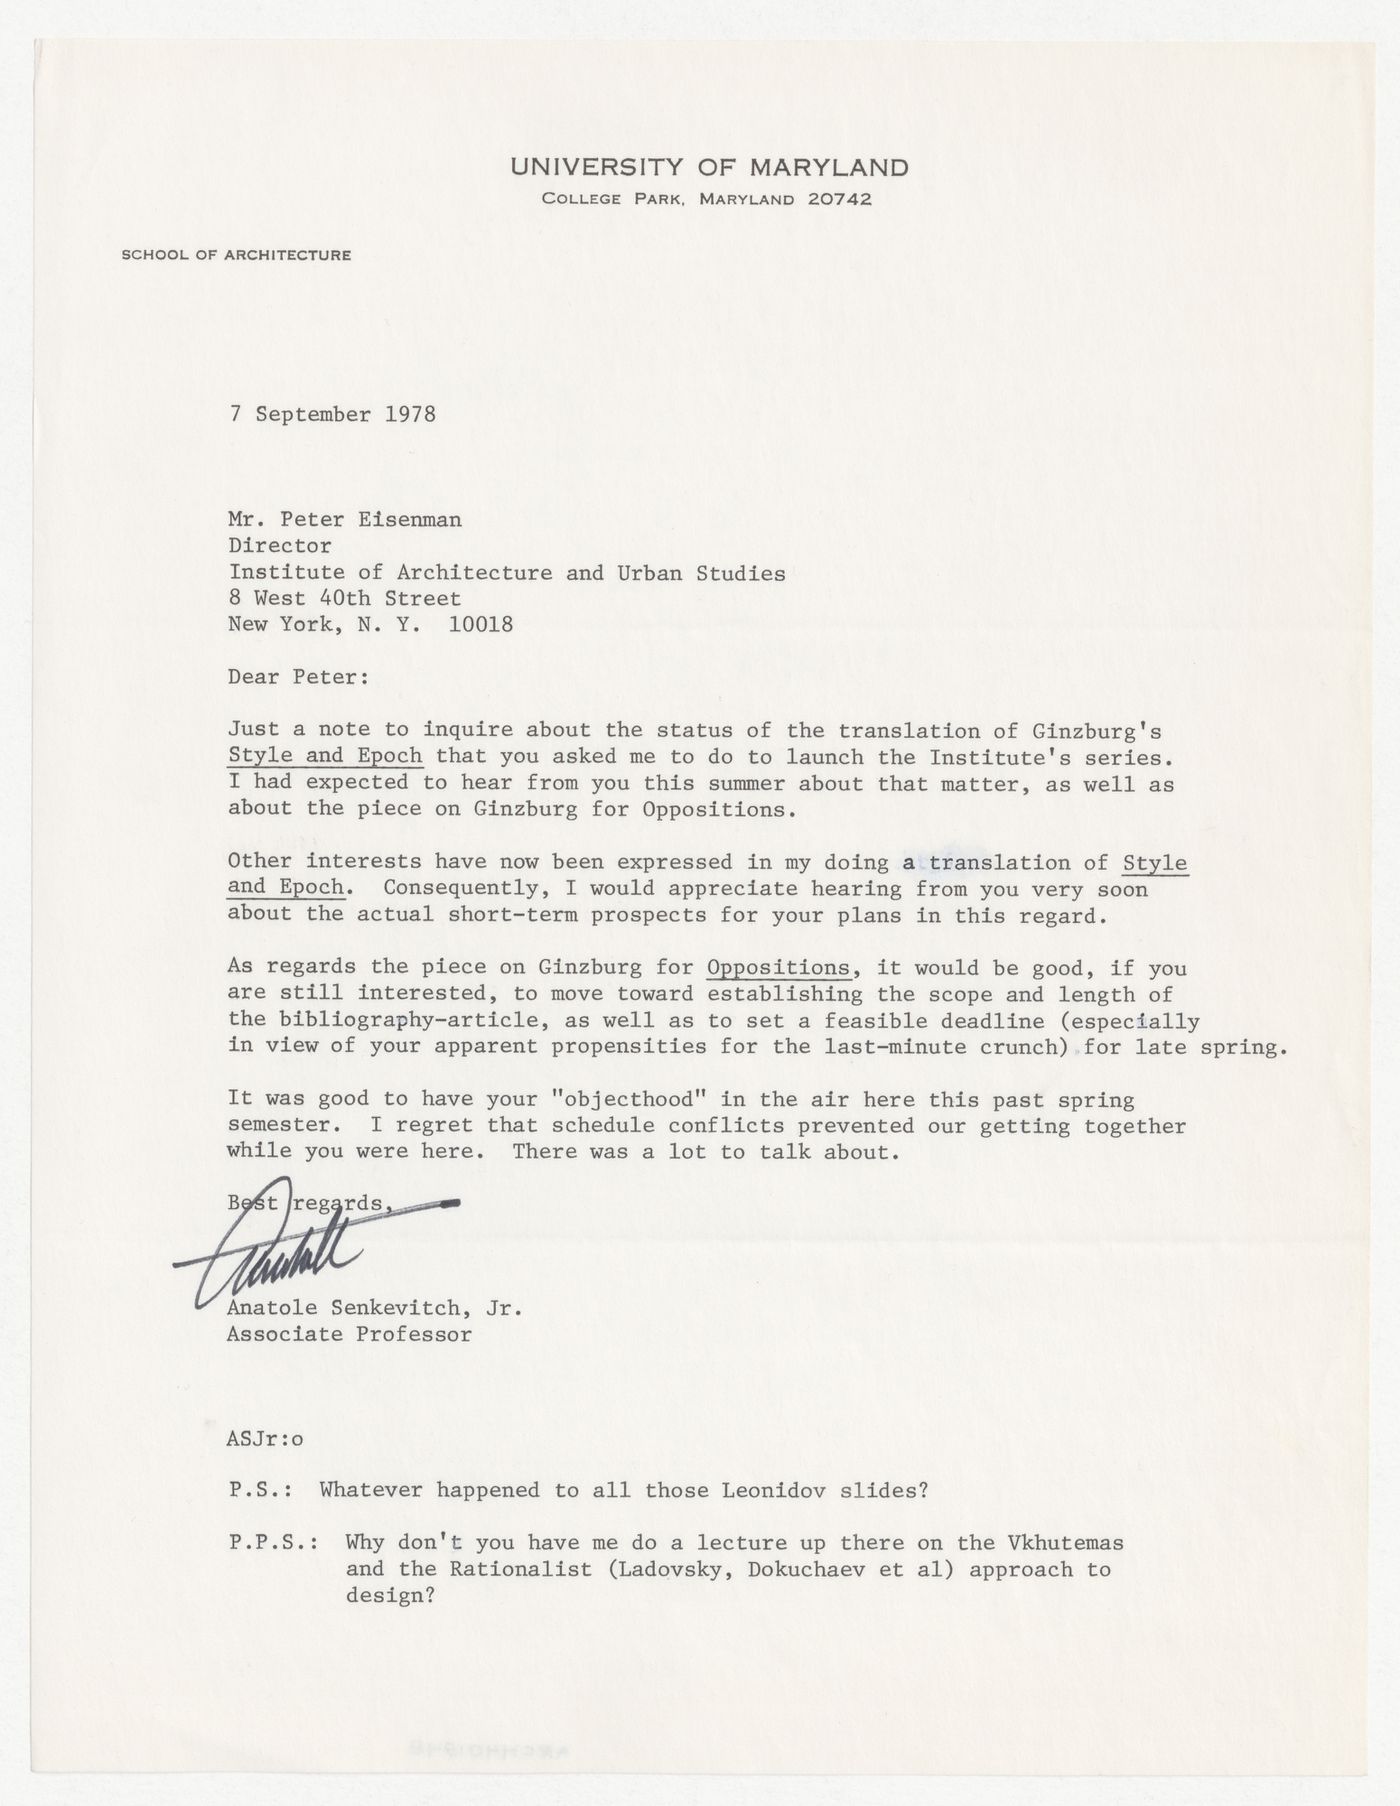 Letter from Anatole Senkevitch Jr. to Peter D. Eisenman about translation of Moisei Ginzburg's book Style and Epoch